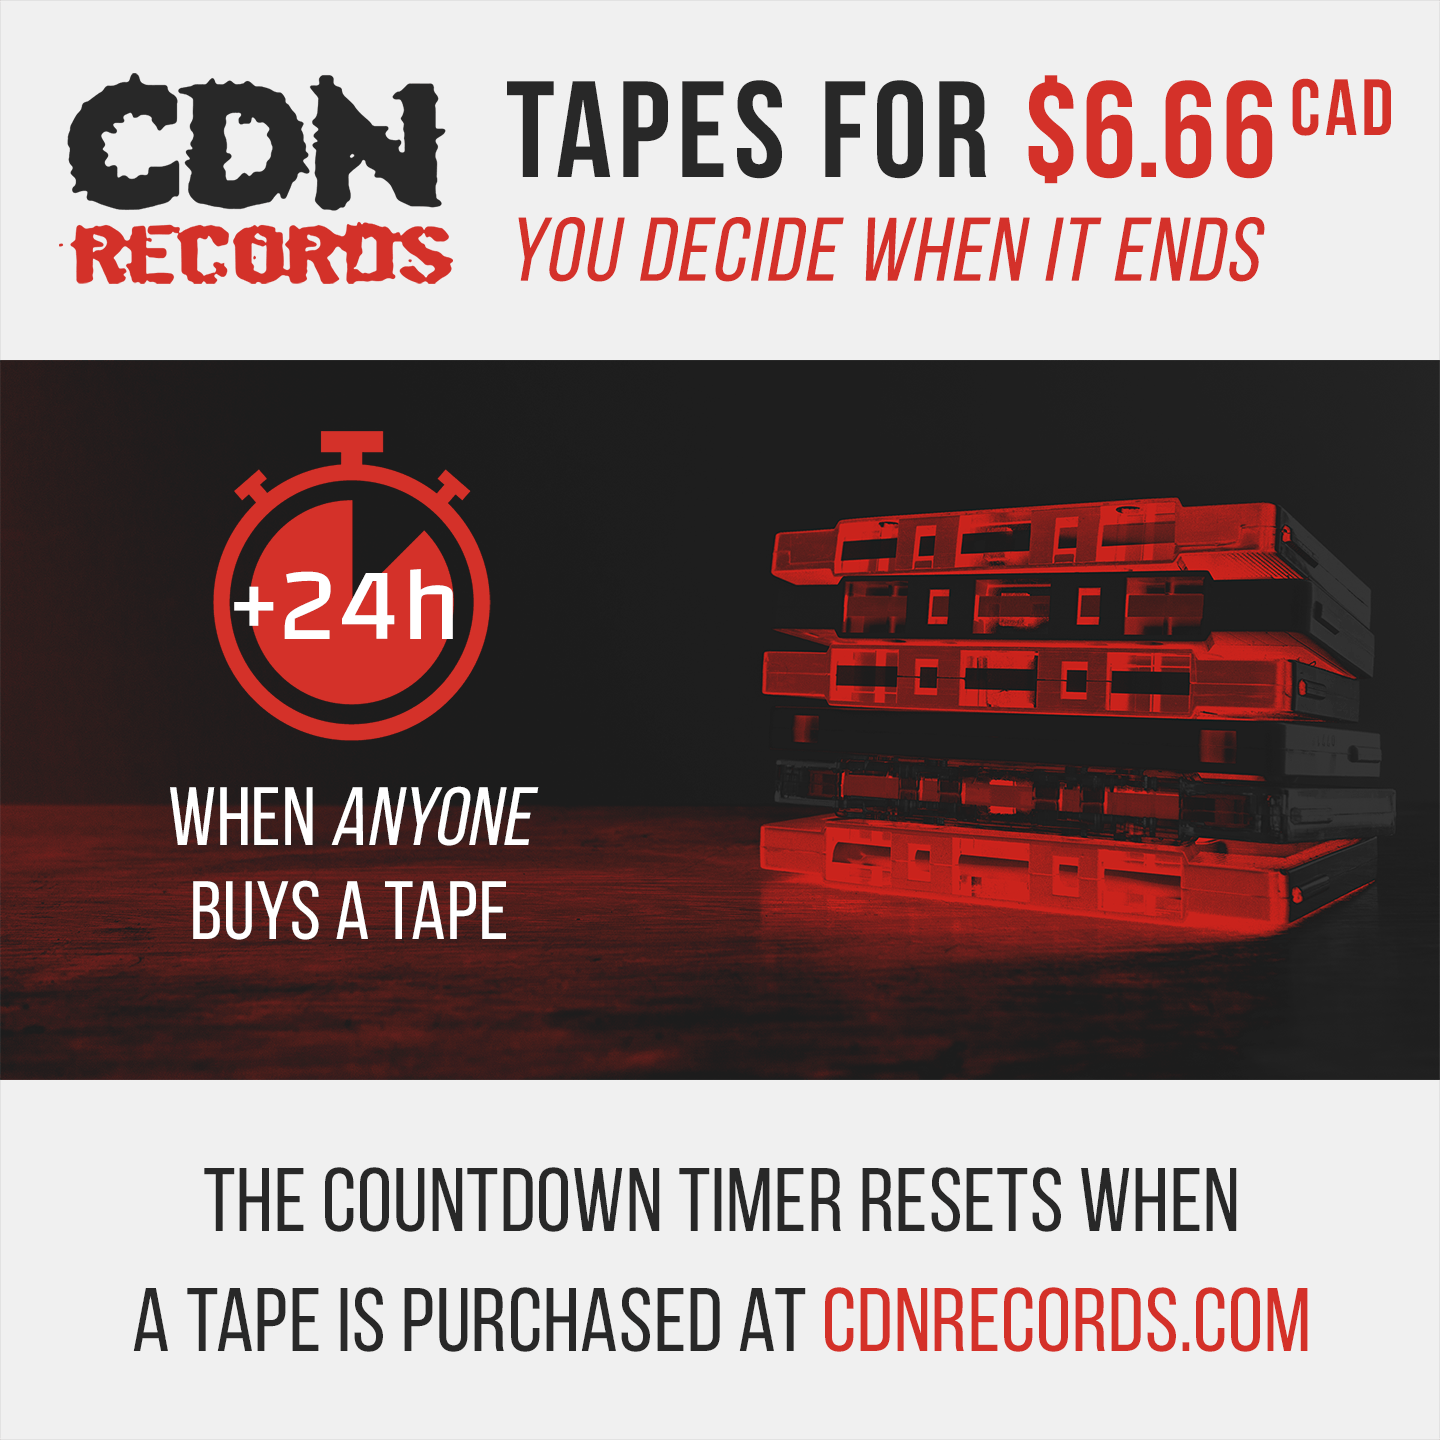 Promo for timed tape sale